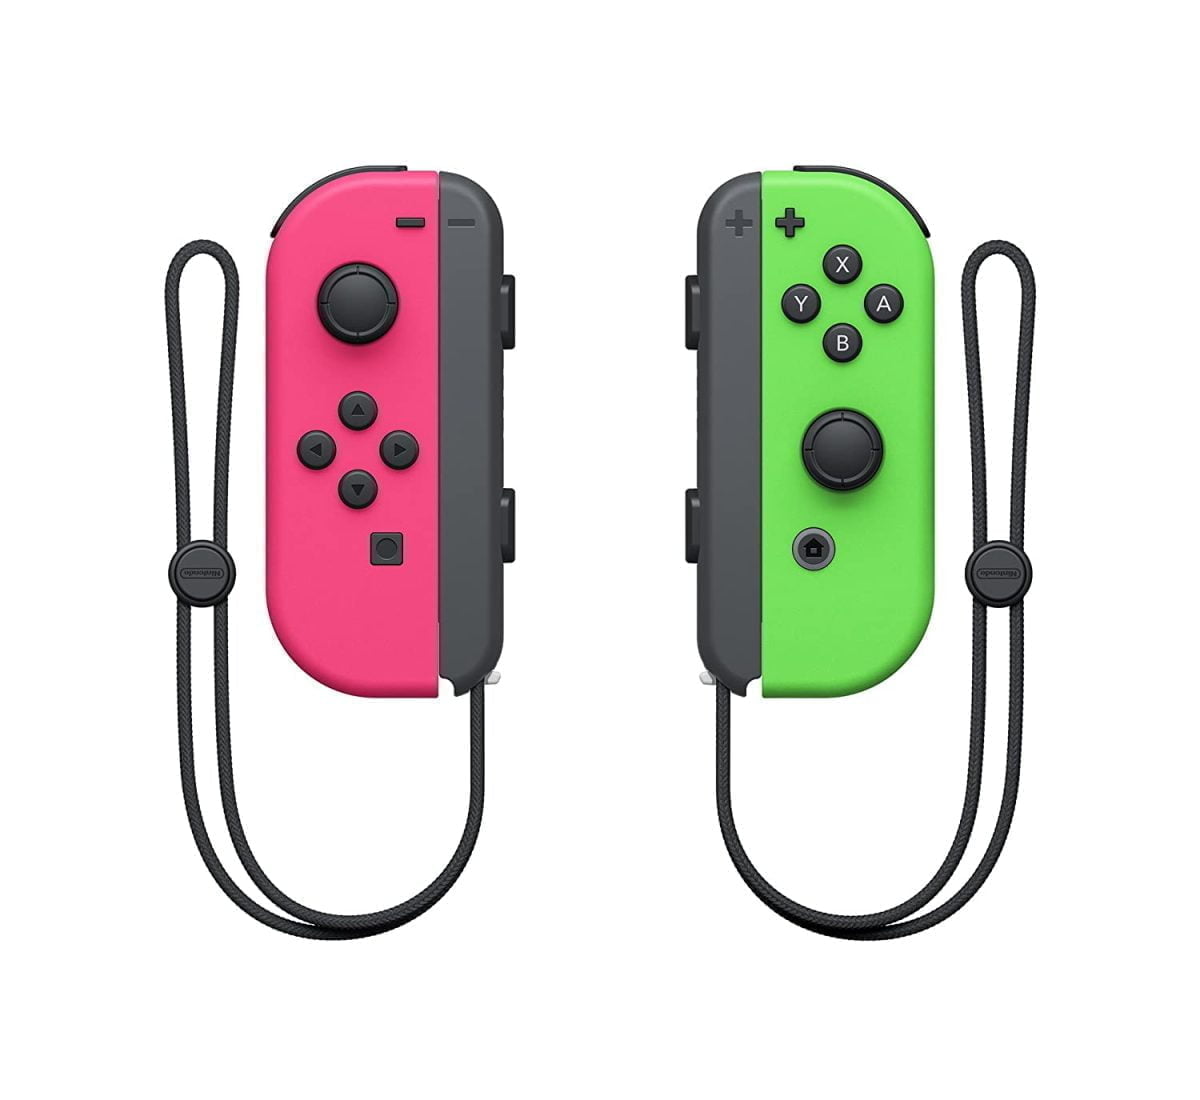 717S4Eejd9L. Sl1500 &Lt;Ul Class=&Quot;A-Unordered-List A-Vertical A-Spacing-None&Quot;&Gt; &Lt;Li&Gt;&Lt;Span Class=&Quot;A-List-Item&Quot;&Gt; Two Joy Con Can Be Used Independently In Each Hand, Or Together As 1 Game Controller When Attached To The Joy Con Grip &Lt;/Span&Gt;&Lt;/Li&Gt; &Lt;Li&Gt;&Lt;Span Class=&Quot;A-List-Item&Quot;&Gt; They Can Also Attach To The Main Console For Use In Handheld Mode, Or Be Shared With Friends To Enjoy 2 Player Action In Supported Games &Lt;/Span&Gt;&Lt;/Li&Gt; &Lt;Li&Gt;&Lt;Span Class=&Quot;A-List-Item&Quot;&Gt; Each Joy Con Has A Full Set Of Buttons And Can Act As A Standalone Controller, And Each Includes An Accelerometer And Gyro Sensor, Making Independent Left And Right Motion Control Possible &Lt;/Span&Gt;&Lt;/Li&Gt; &Lt;/Ul&Gt; Nintendo Joy-Con Pair- Neon Green / Neon Pink